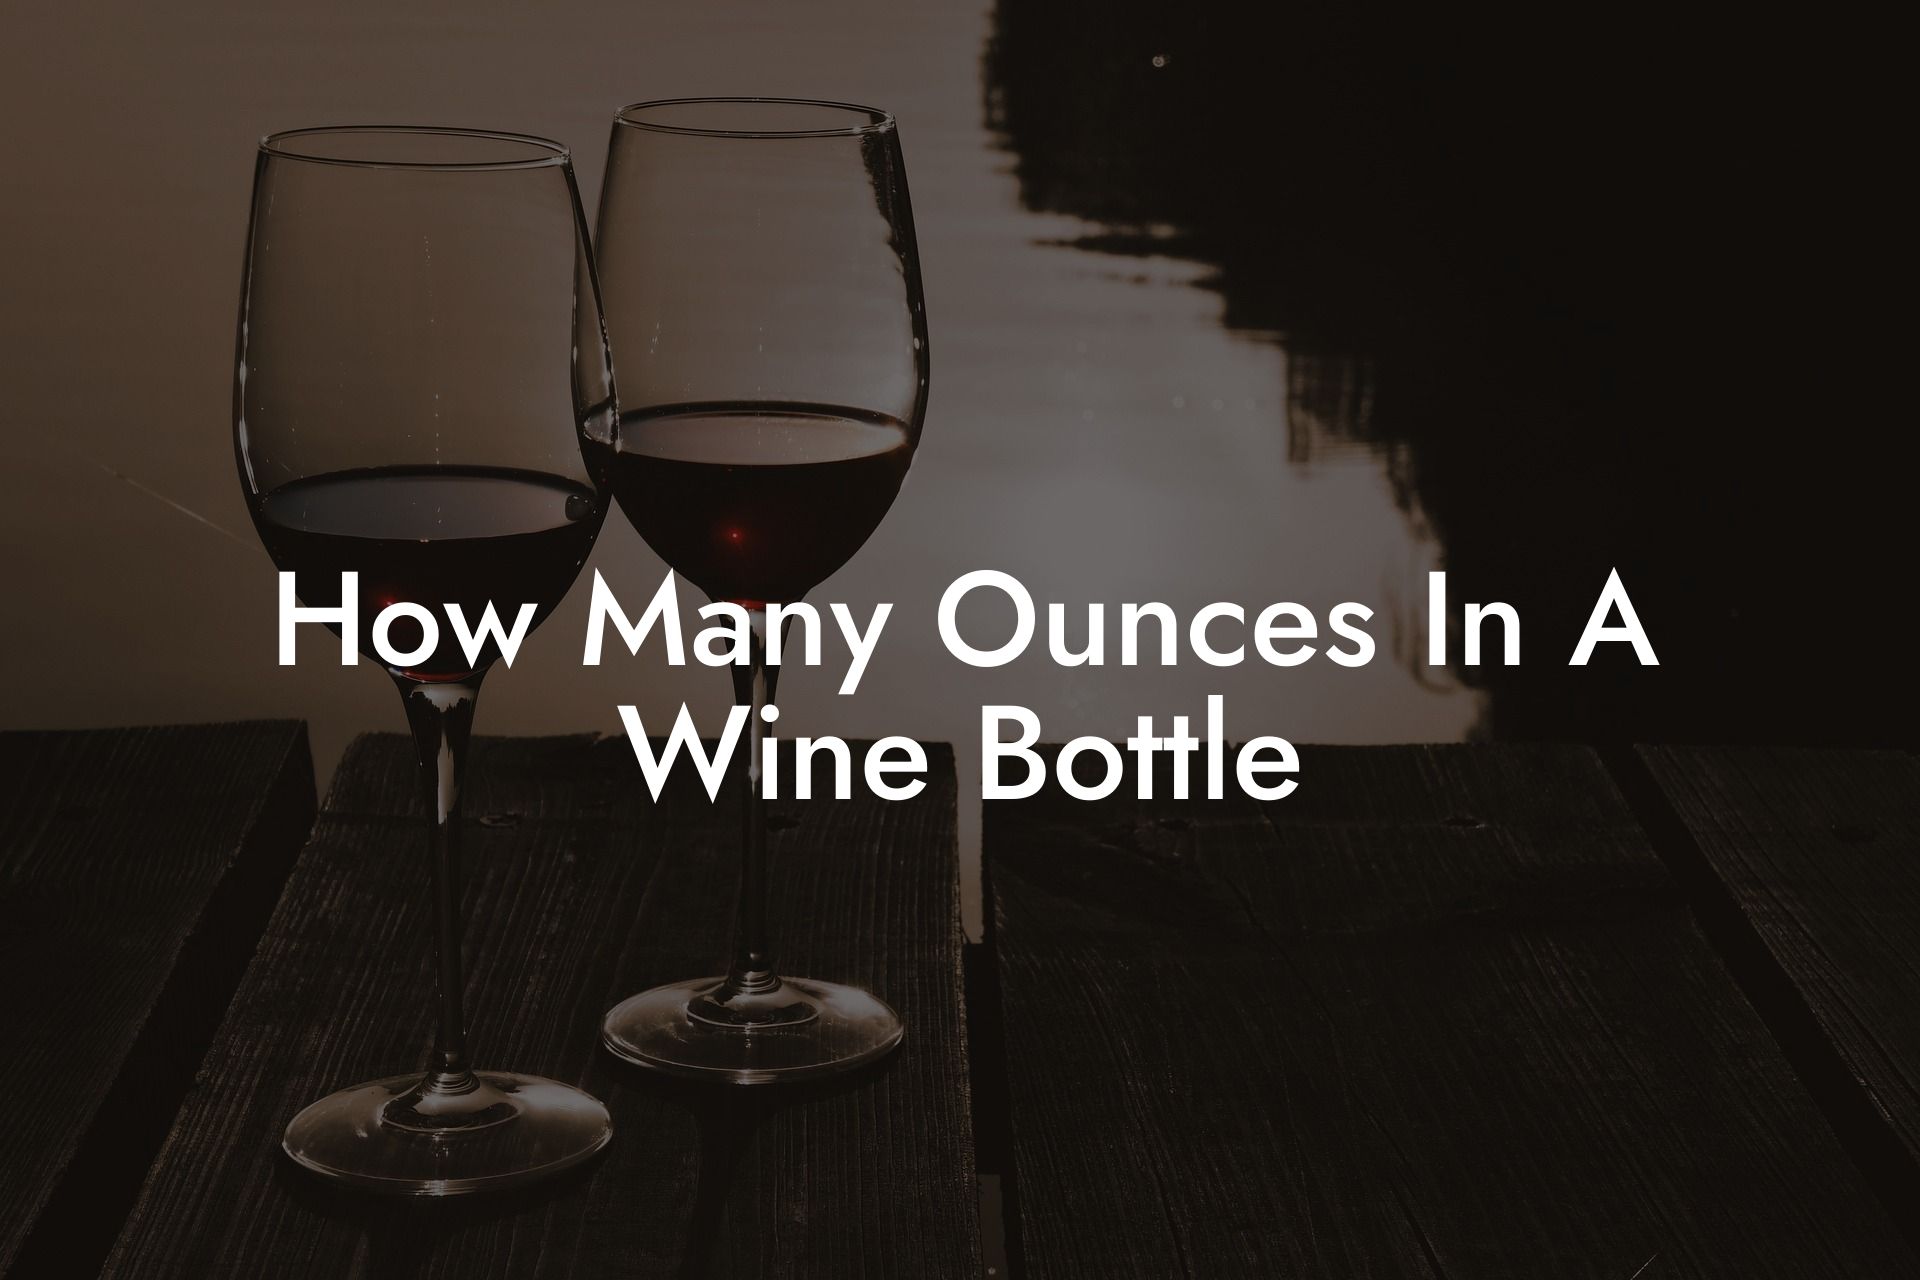 How Many Ounces In A Wine Bottle